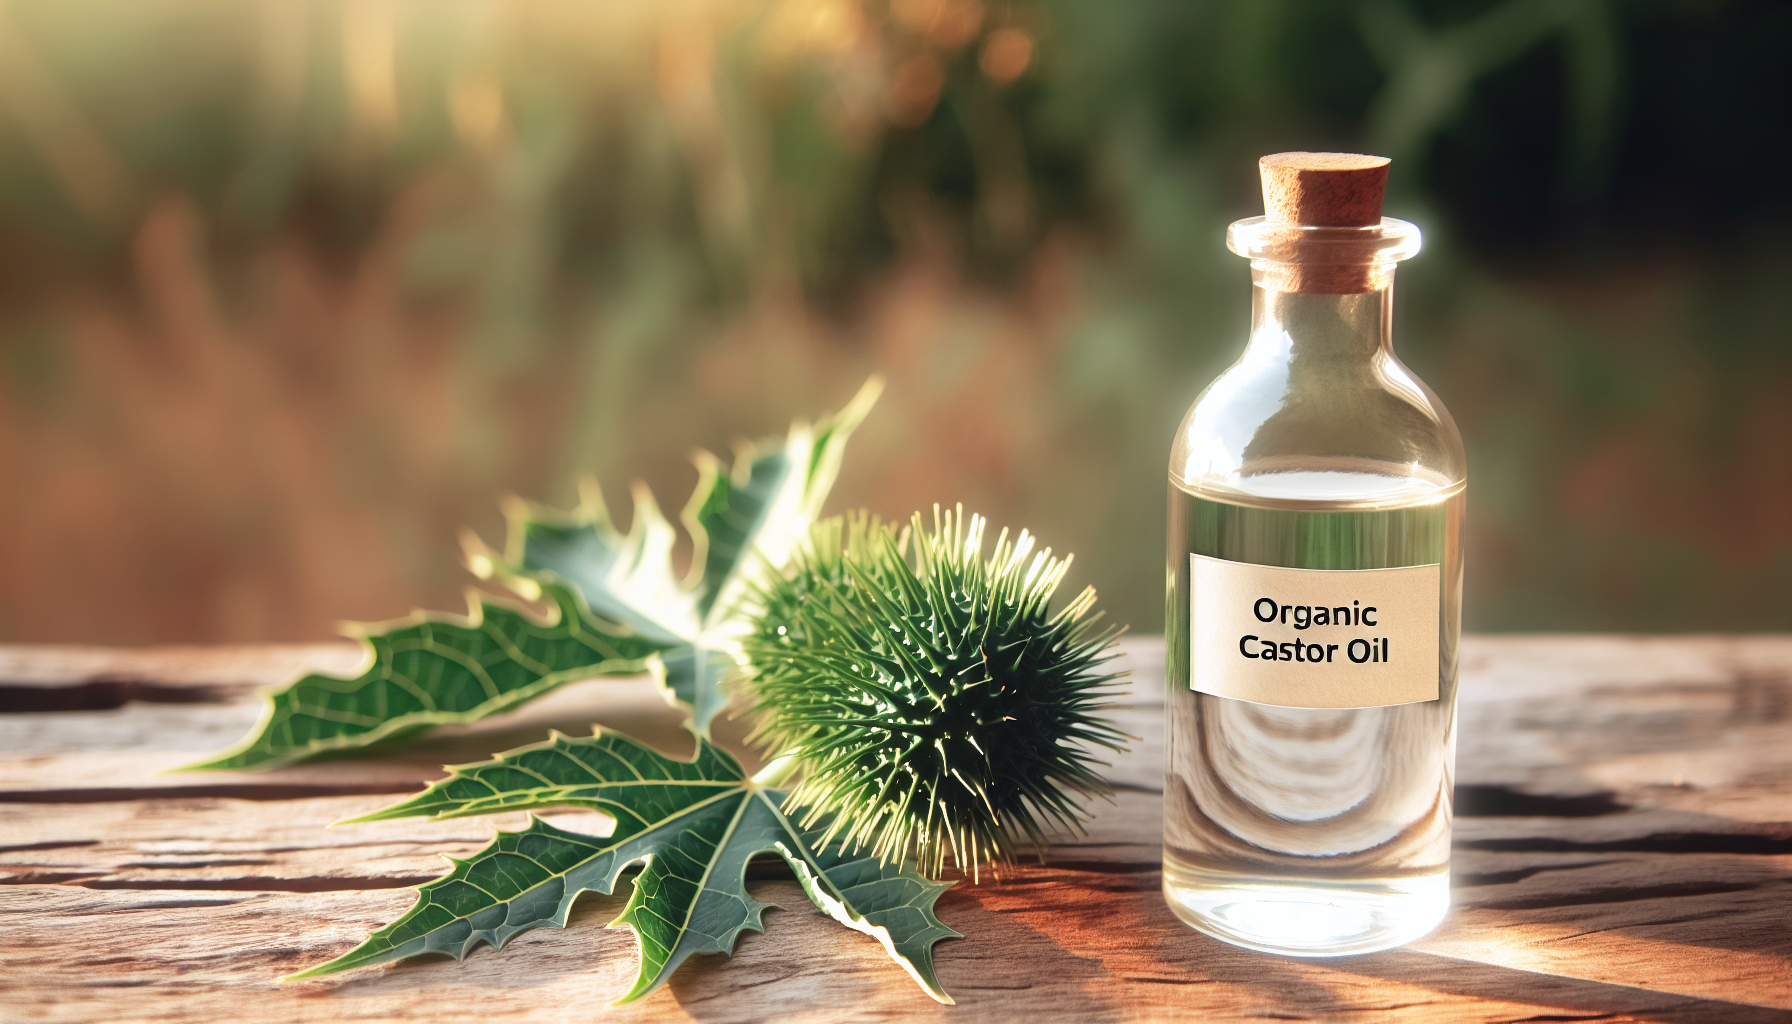 Bottle of organic castor oil with castor plant in the background